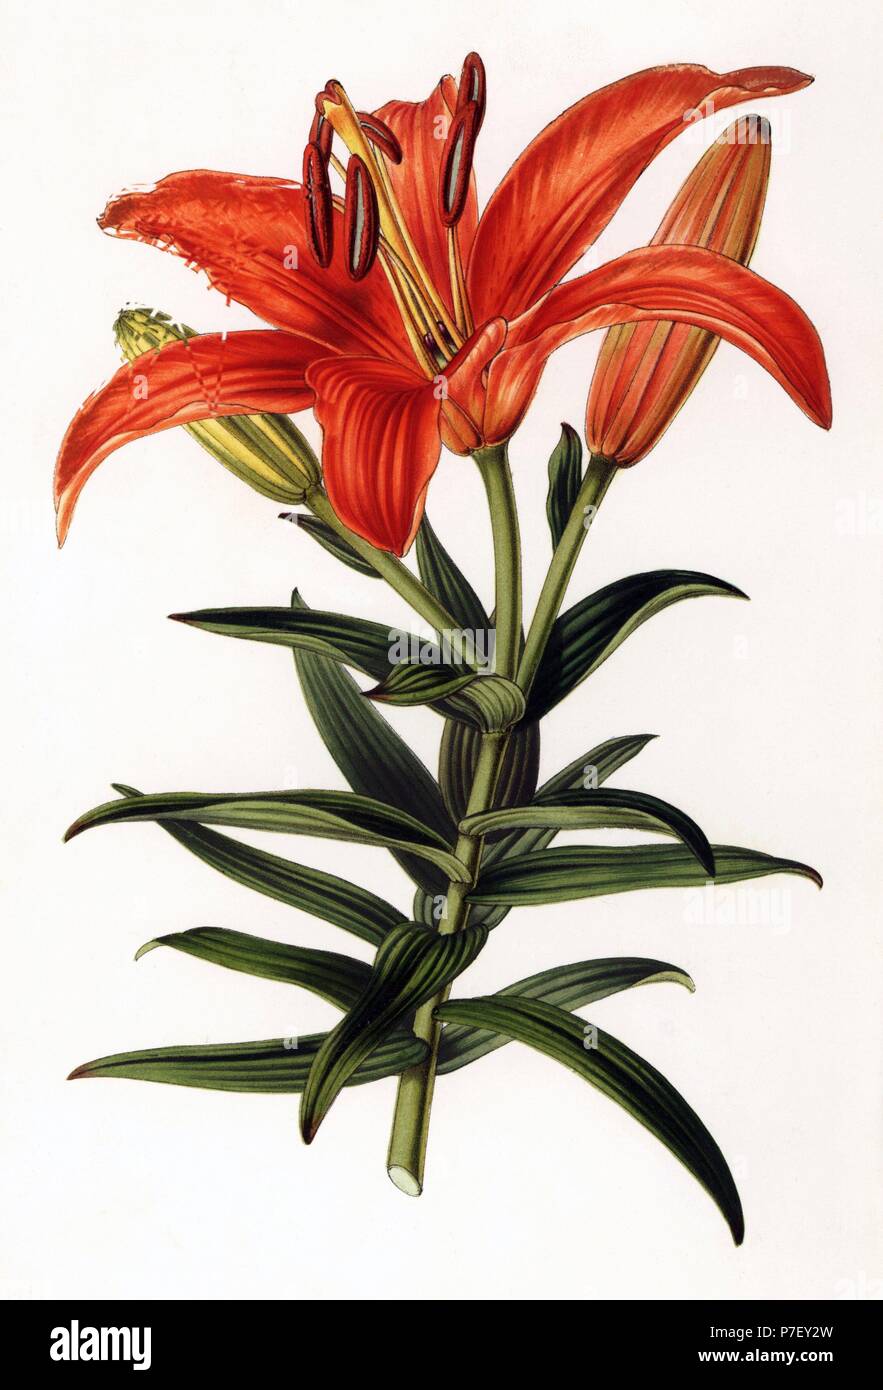 Sukashiyuri lily, Lilium maculatum (Lilium venustum). Handcoloured lithograph by L. Stroobant from Louis van Houtte and Charles Lemaire's Flowers of the Gardens and Hothouses of Europe, Flore des Serres et des Jardins de l'Europe, Ghent, Belgium, 1851. Stock Photo